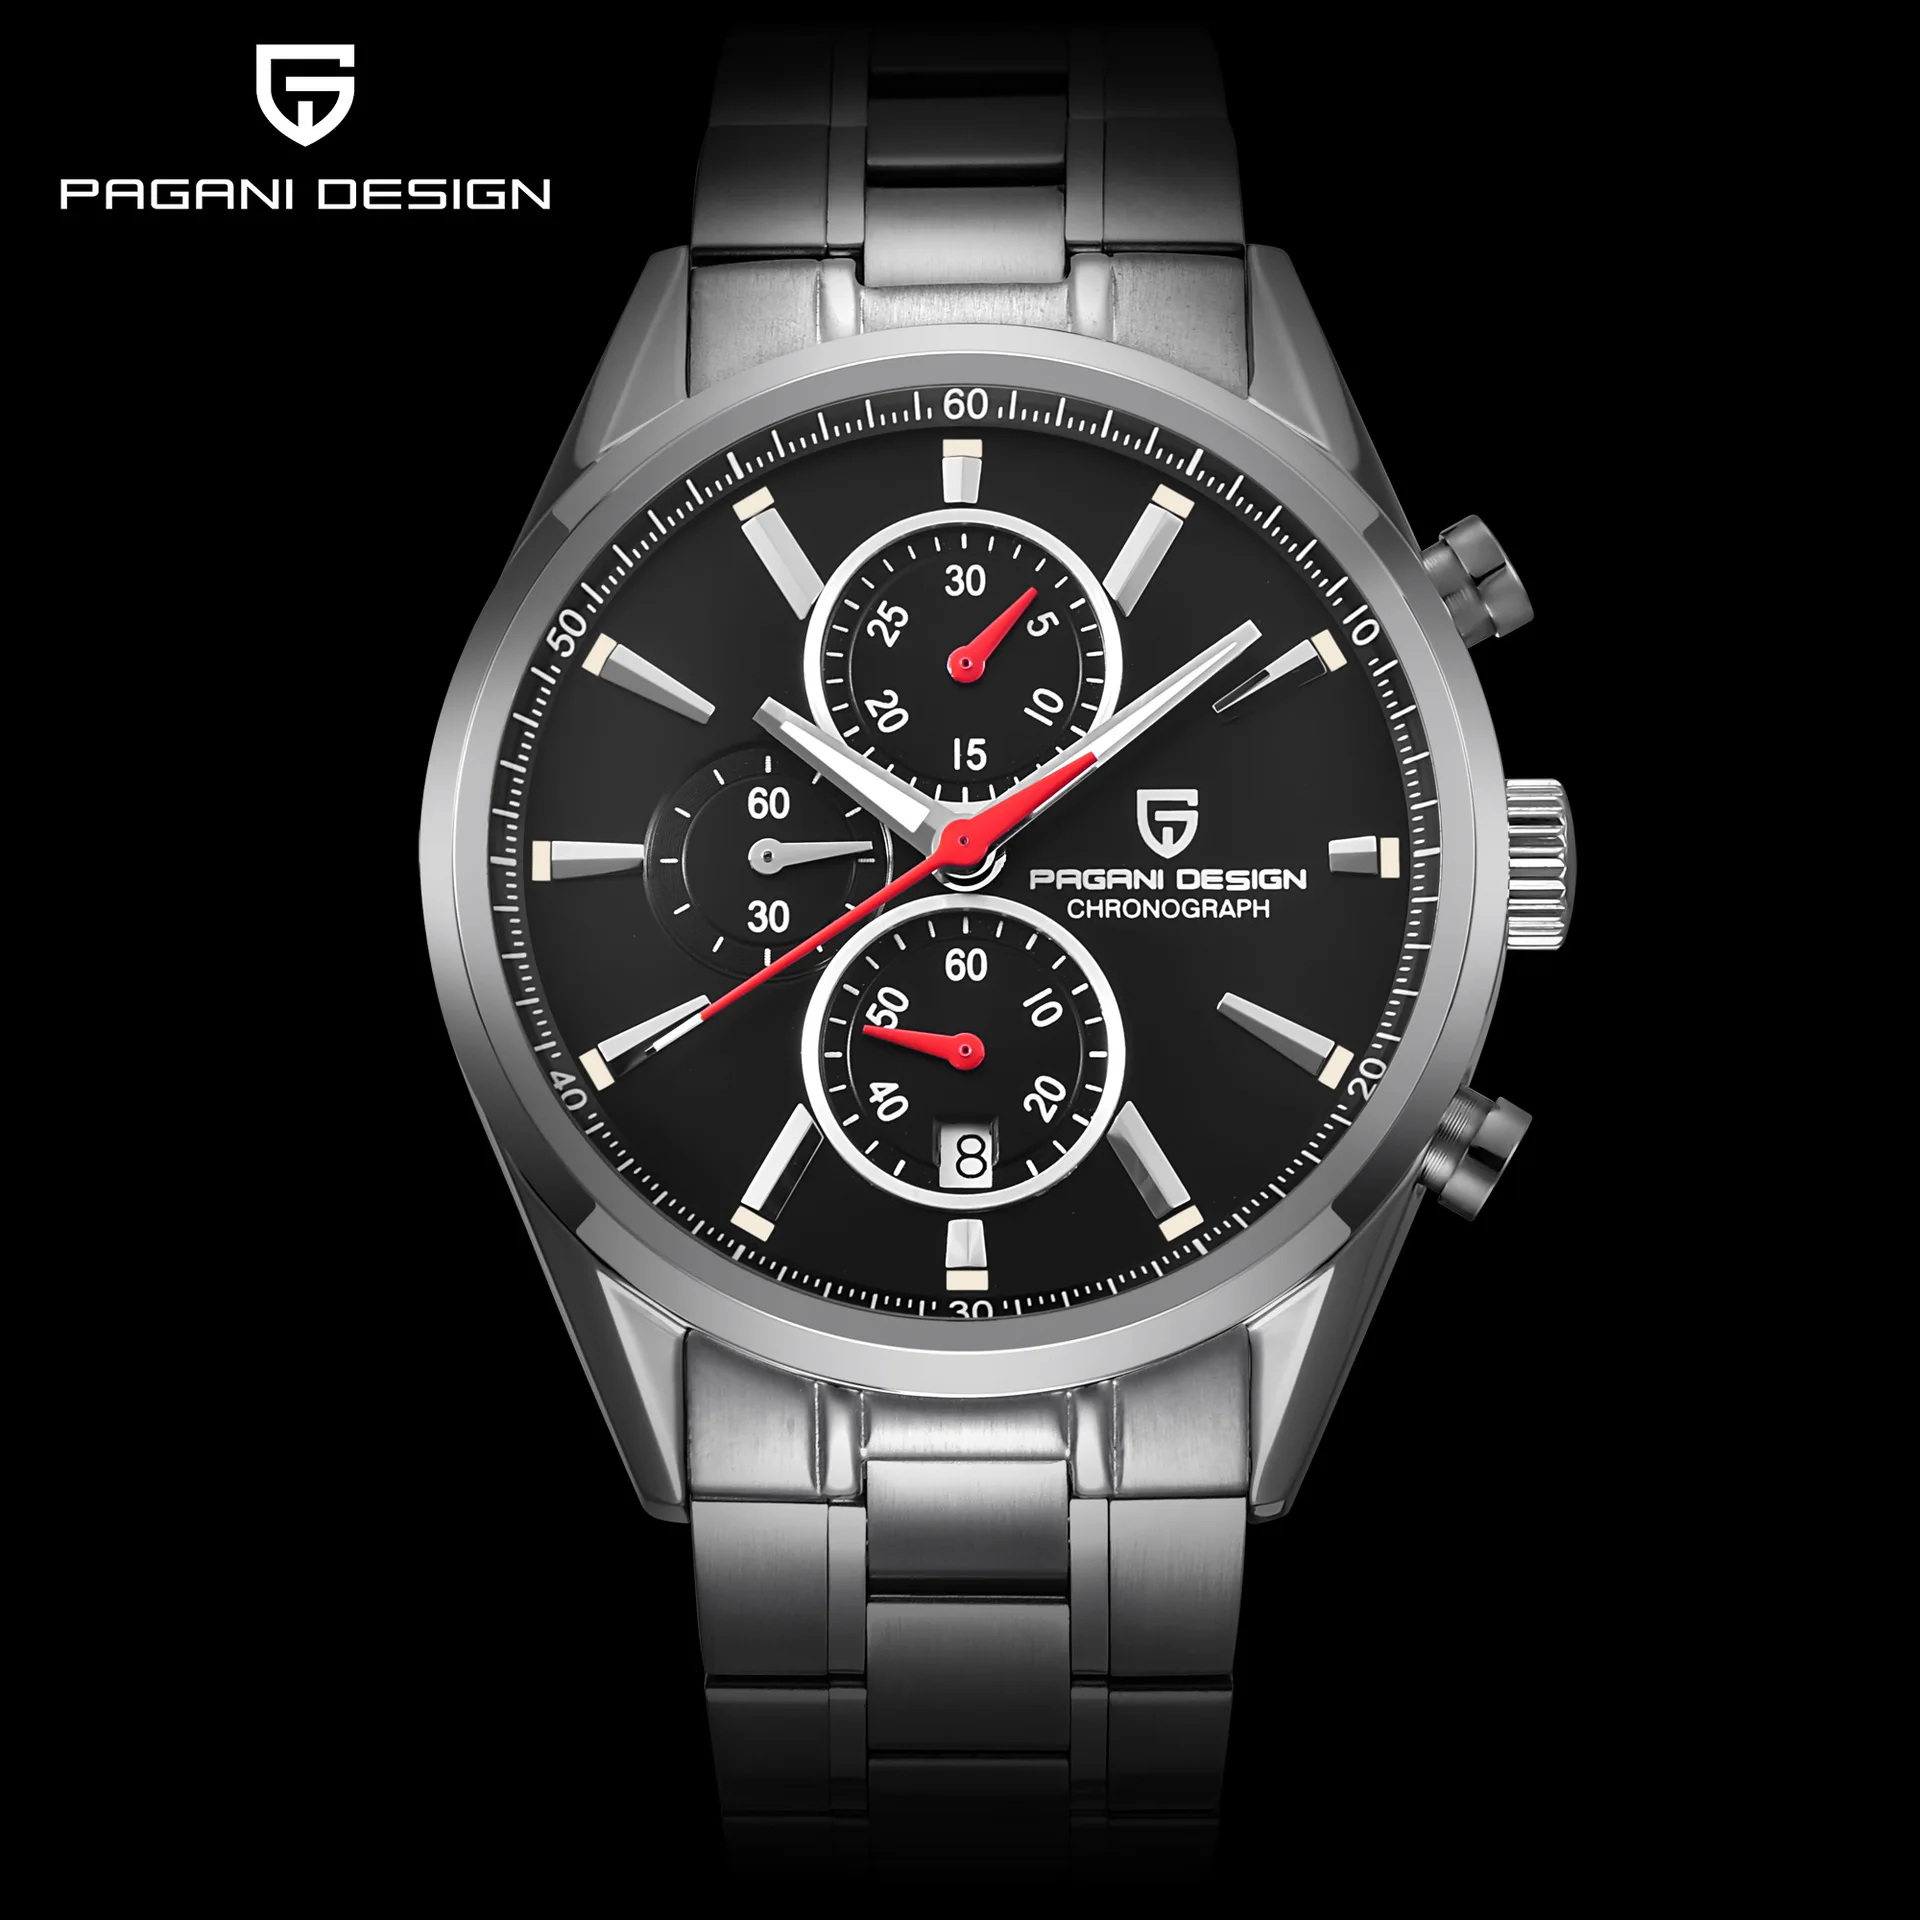 PAGANI Chronograph Men's Sport Watches Silver Stainless Steel Case and Strap Wristwatch Men Quartz Watches Analog Clock A330